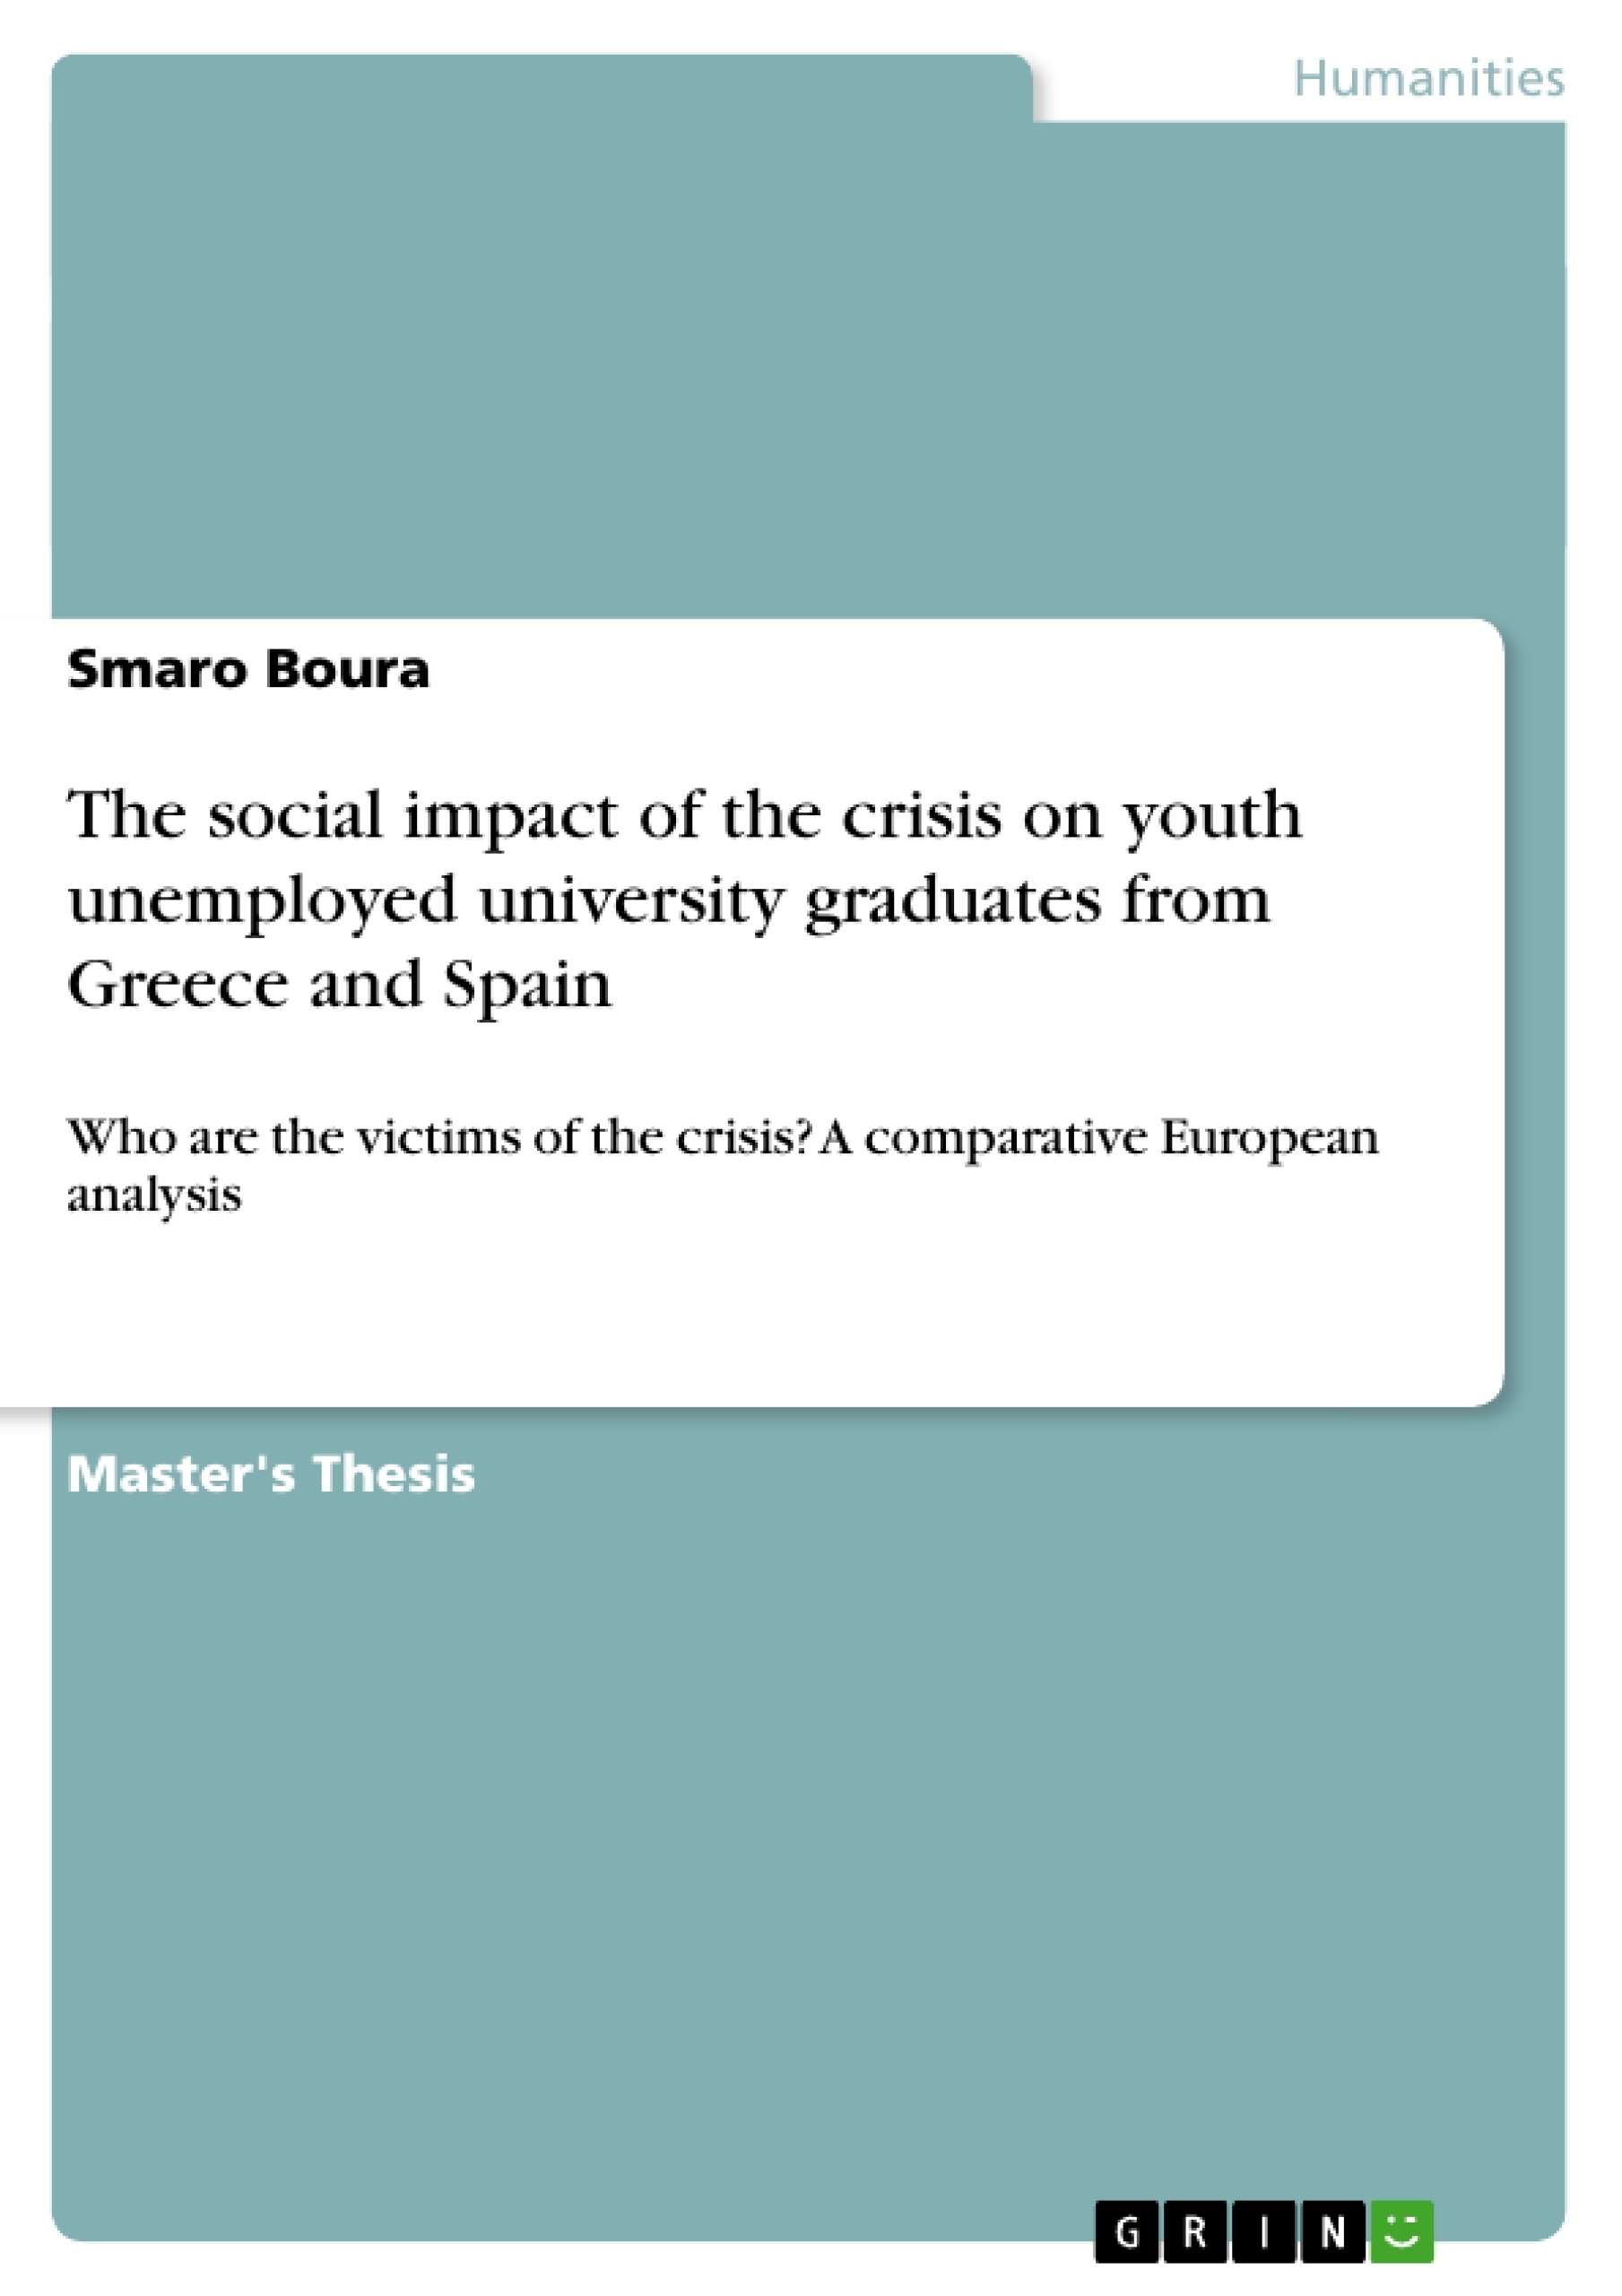 Title: The social impact of the crisis on youth unemployed university graduates from Greece and Spain